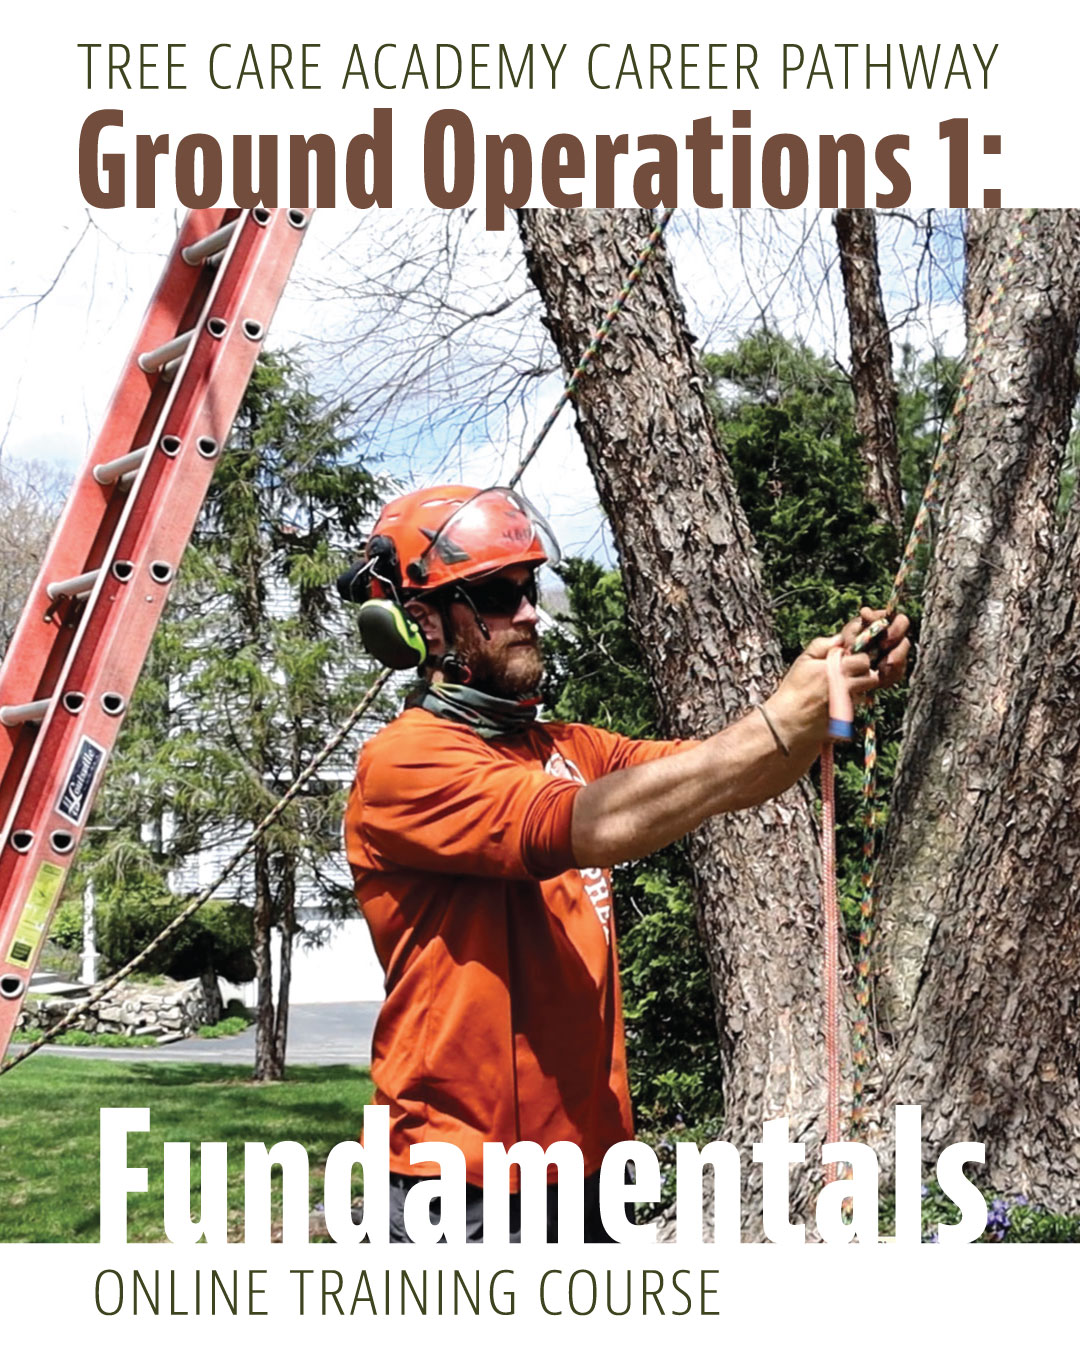 Ground Operations 1: Fundamentals Online Training Course